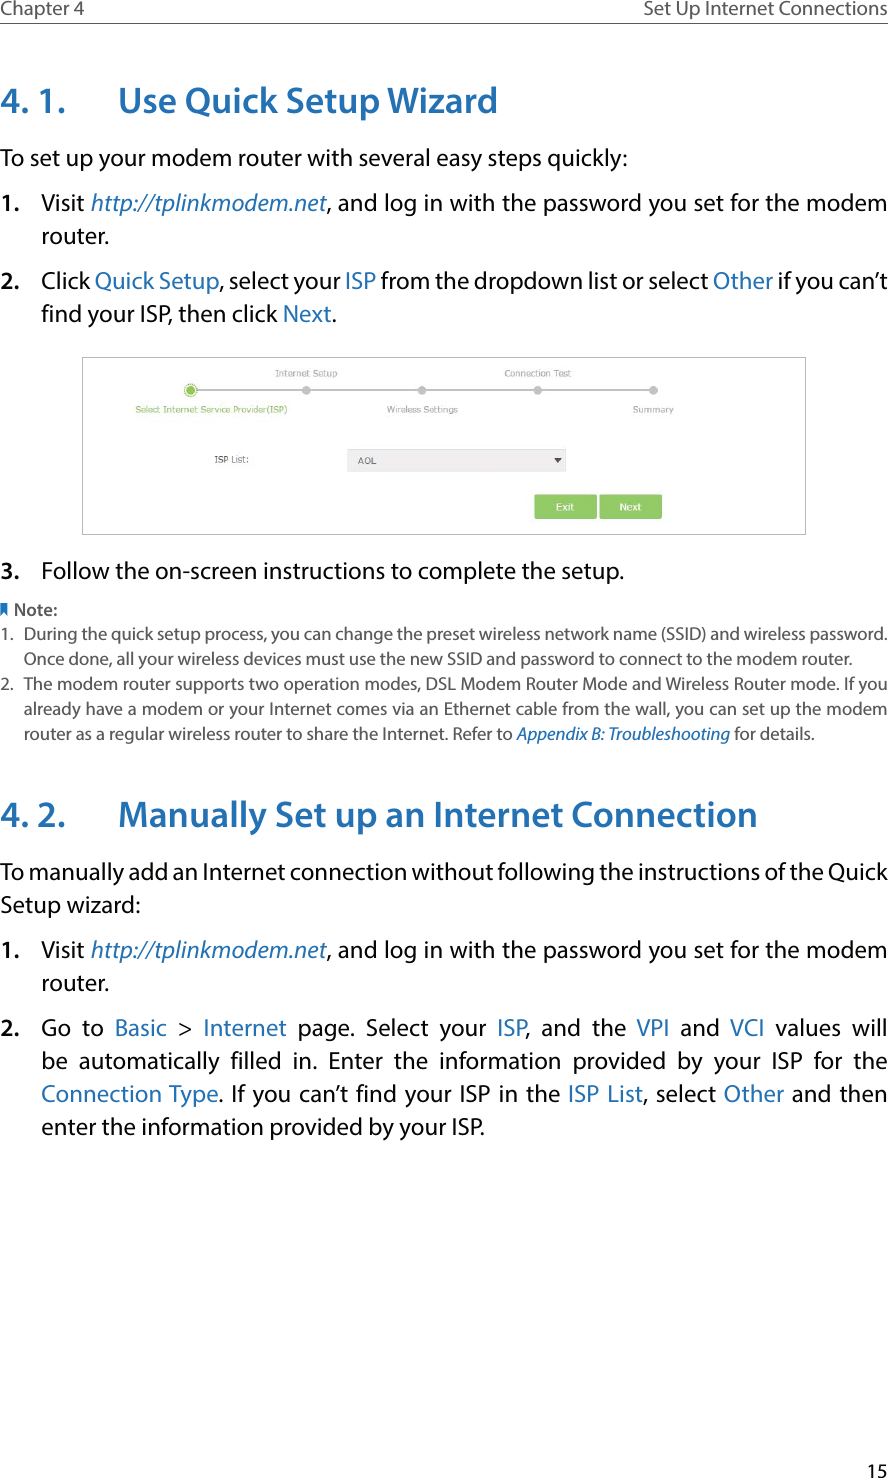 15Chapter 4 Set Up Internet Connections4. 1.  Use Quick Setup WizardTo set up your modem router with several easy steps quickly:1.  Visit http://tplinkmodem.net, and log in with the password you set for the modem router.2.  Click Quick Setup, select your ISP from the dropdown list or select Other if you can’t find your ISP, then click Next. 3.  Follow the on-screen instructions to complete the setup.Note:1.  During the quick setup process, you can change the preset wireless network name (SSID) and wireless password. Once done, all your wireless devices must use the new SSID and password to connect to the modem router.2.  The modem router supports two operation modes, DSL Modem Router Mode and Wireless Router mode. If you already have a modem or your Internet comes via an Ethernet cable from the wall, you can set up the modem router as a regular wireless router to share the Internet. Refer to Appendix B: Troubleshooting for details.4. 2.  Manually Set up an Internet ConnectionTo manually add an Internet connection without following the instructions of the Quick Setup wizard:1.  Visit http://tplinkmodem.net, and log in with the password you set for the modem router.2.  Go to Basic &gt; Internet page. Select your ISP, and the VPI and VCI  values will be automatically filled in. Enter the information provided by your ISP for the Connection Type. If you can’t find your ISP in the ISP List, select Other and then enter the information provided by your ISP.